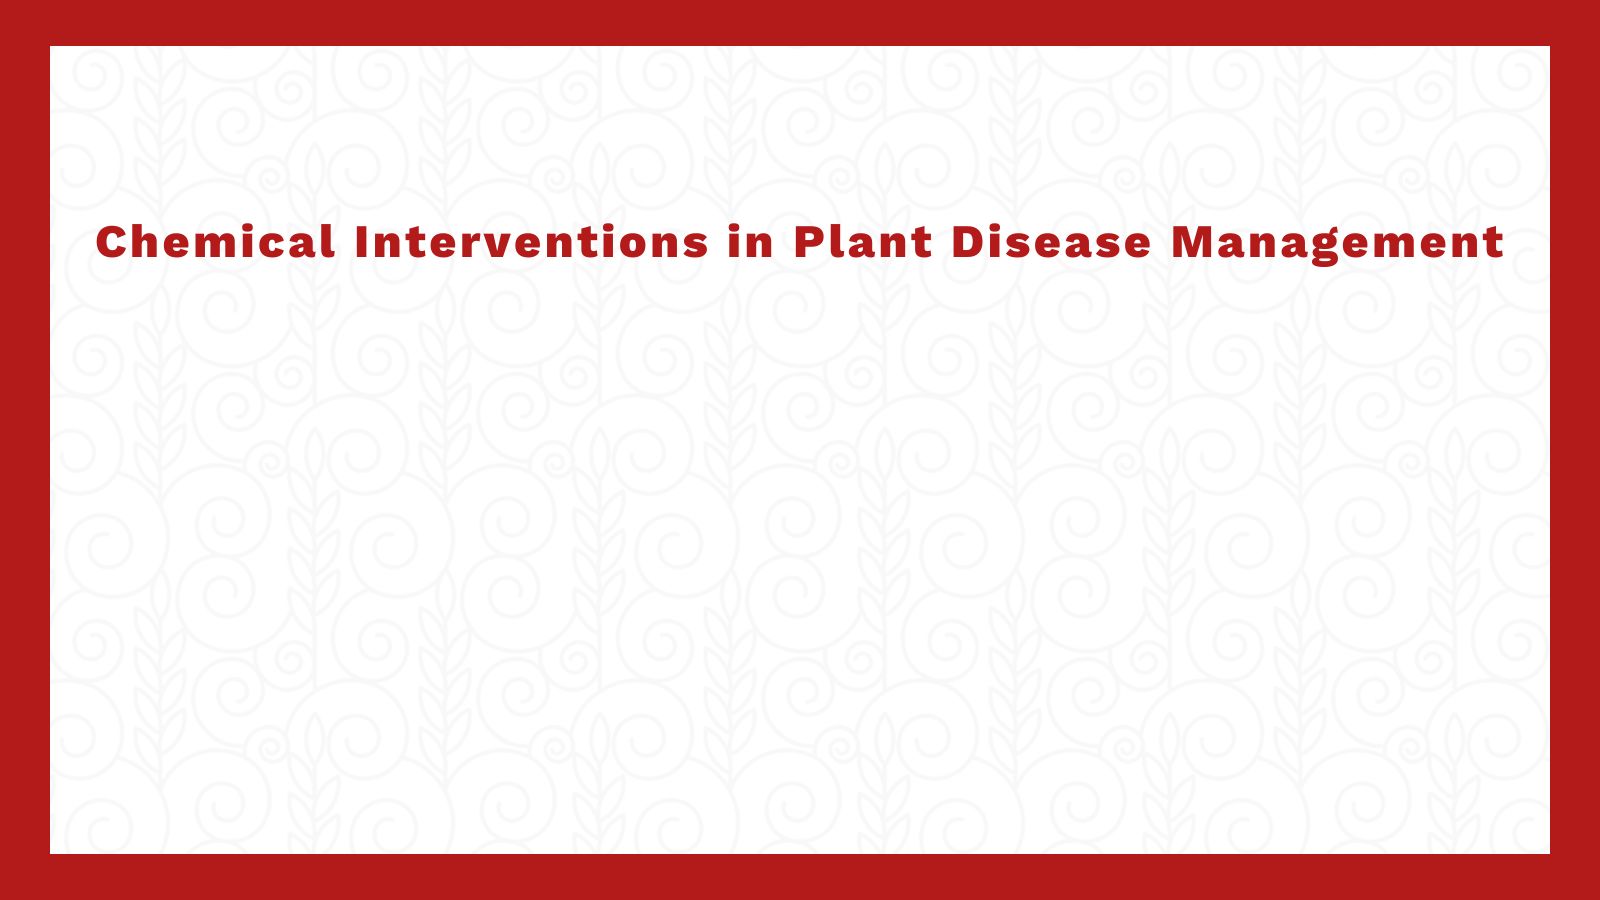 Chemical Interventions in Plant Disease Management